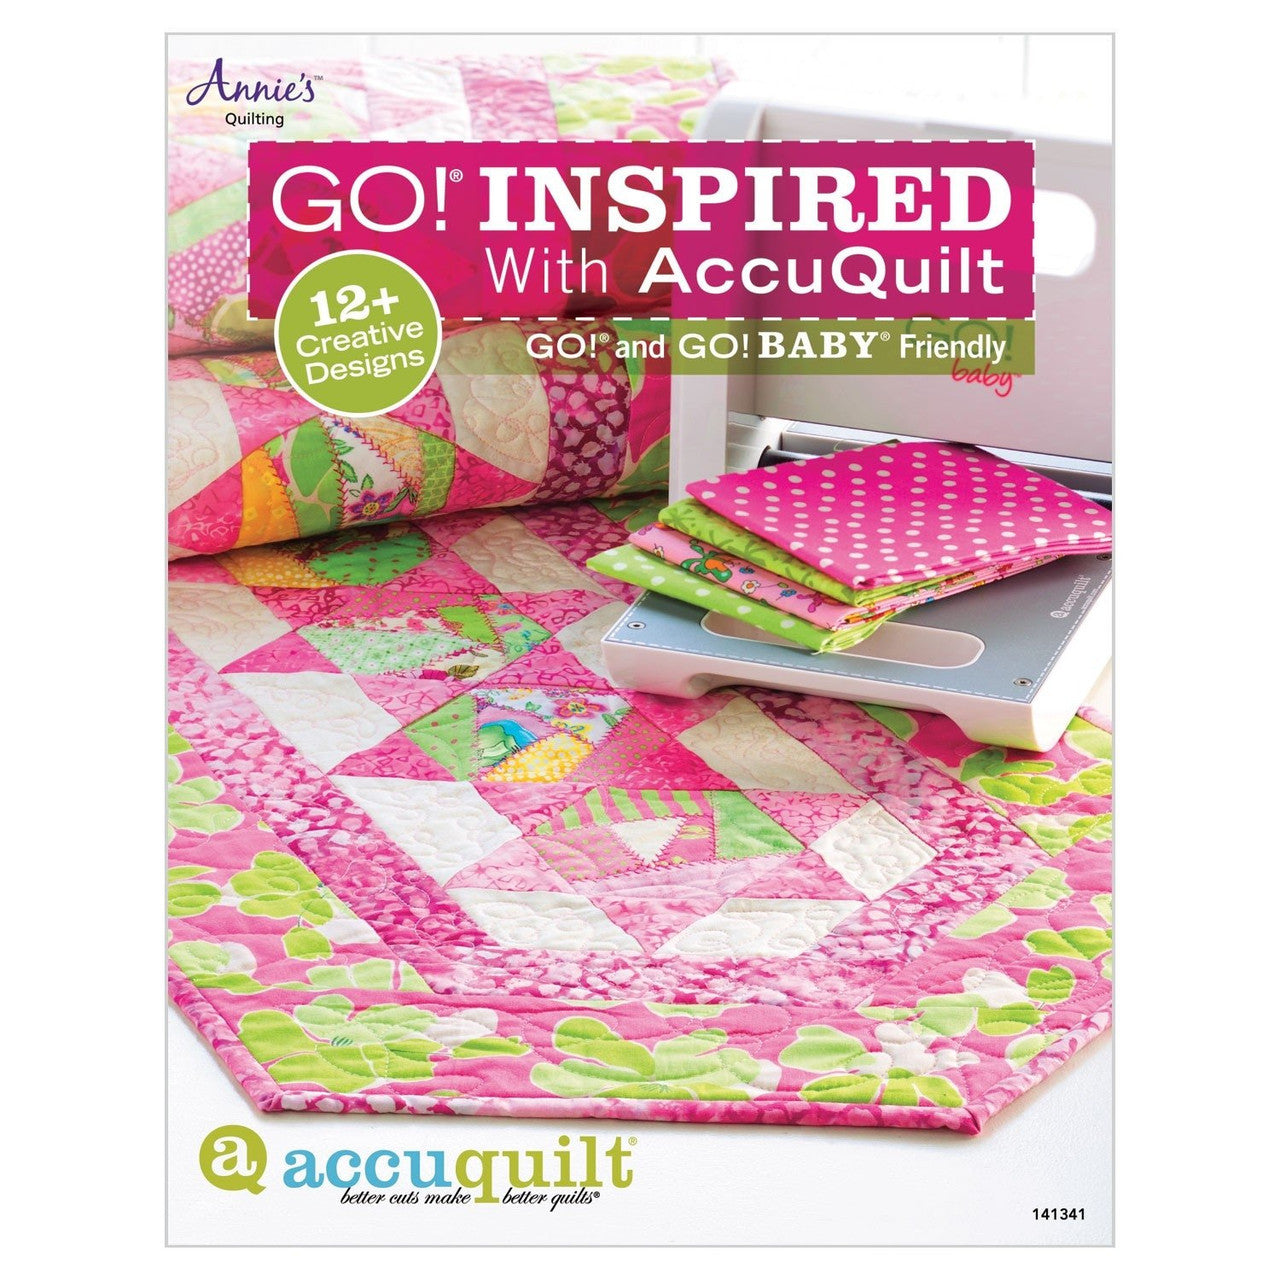 GO! Inspired Book by Annie's Quilting